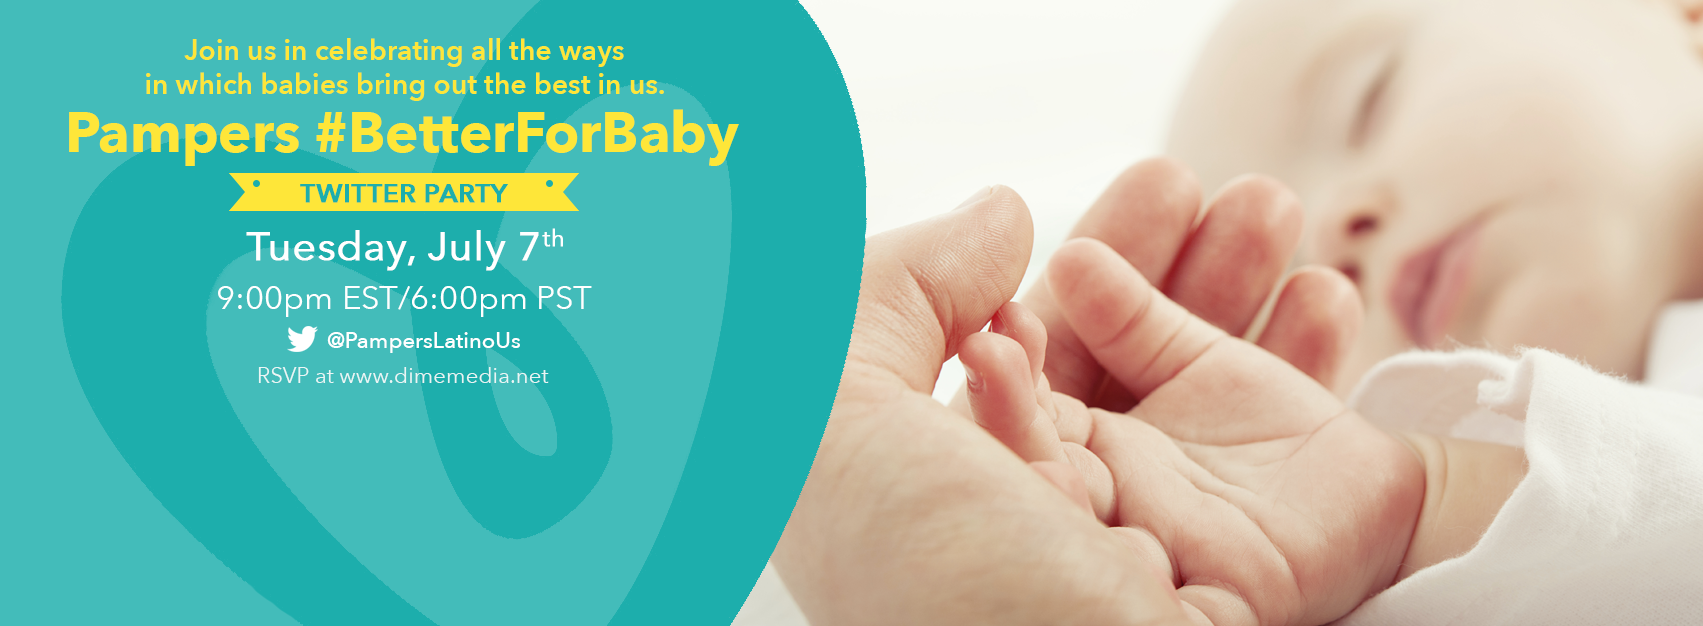 Pampers #BetterForBaby Twitter Party Invite_B